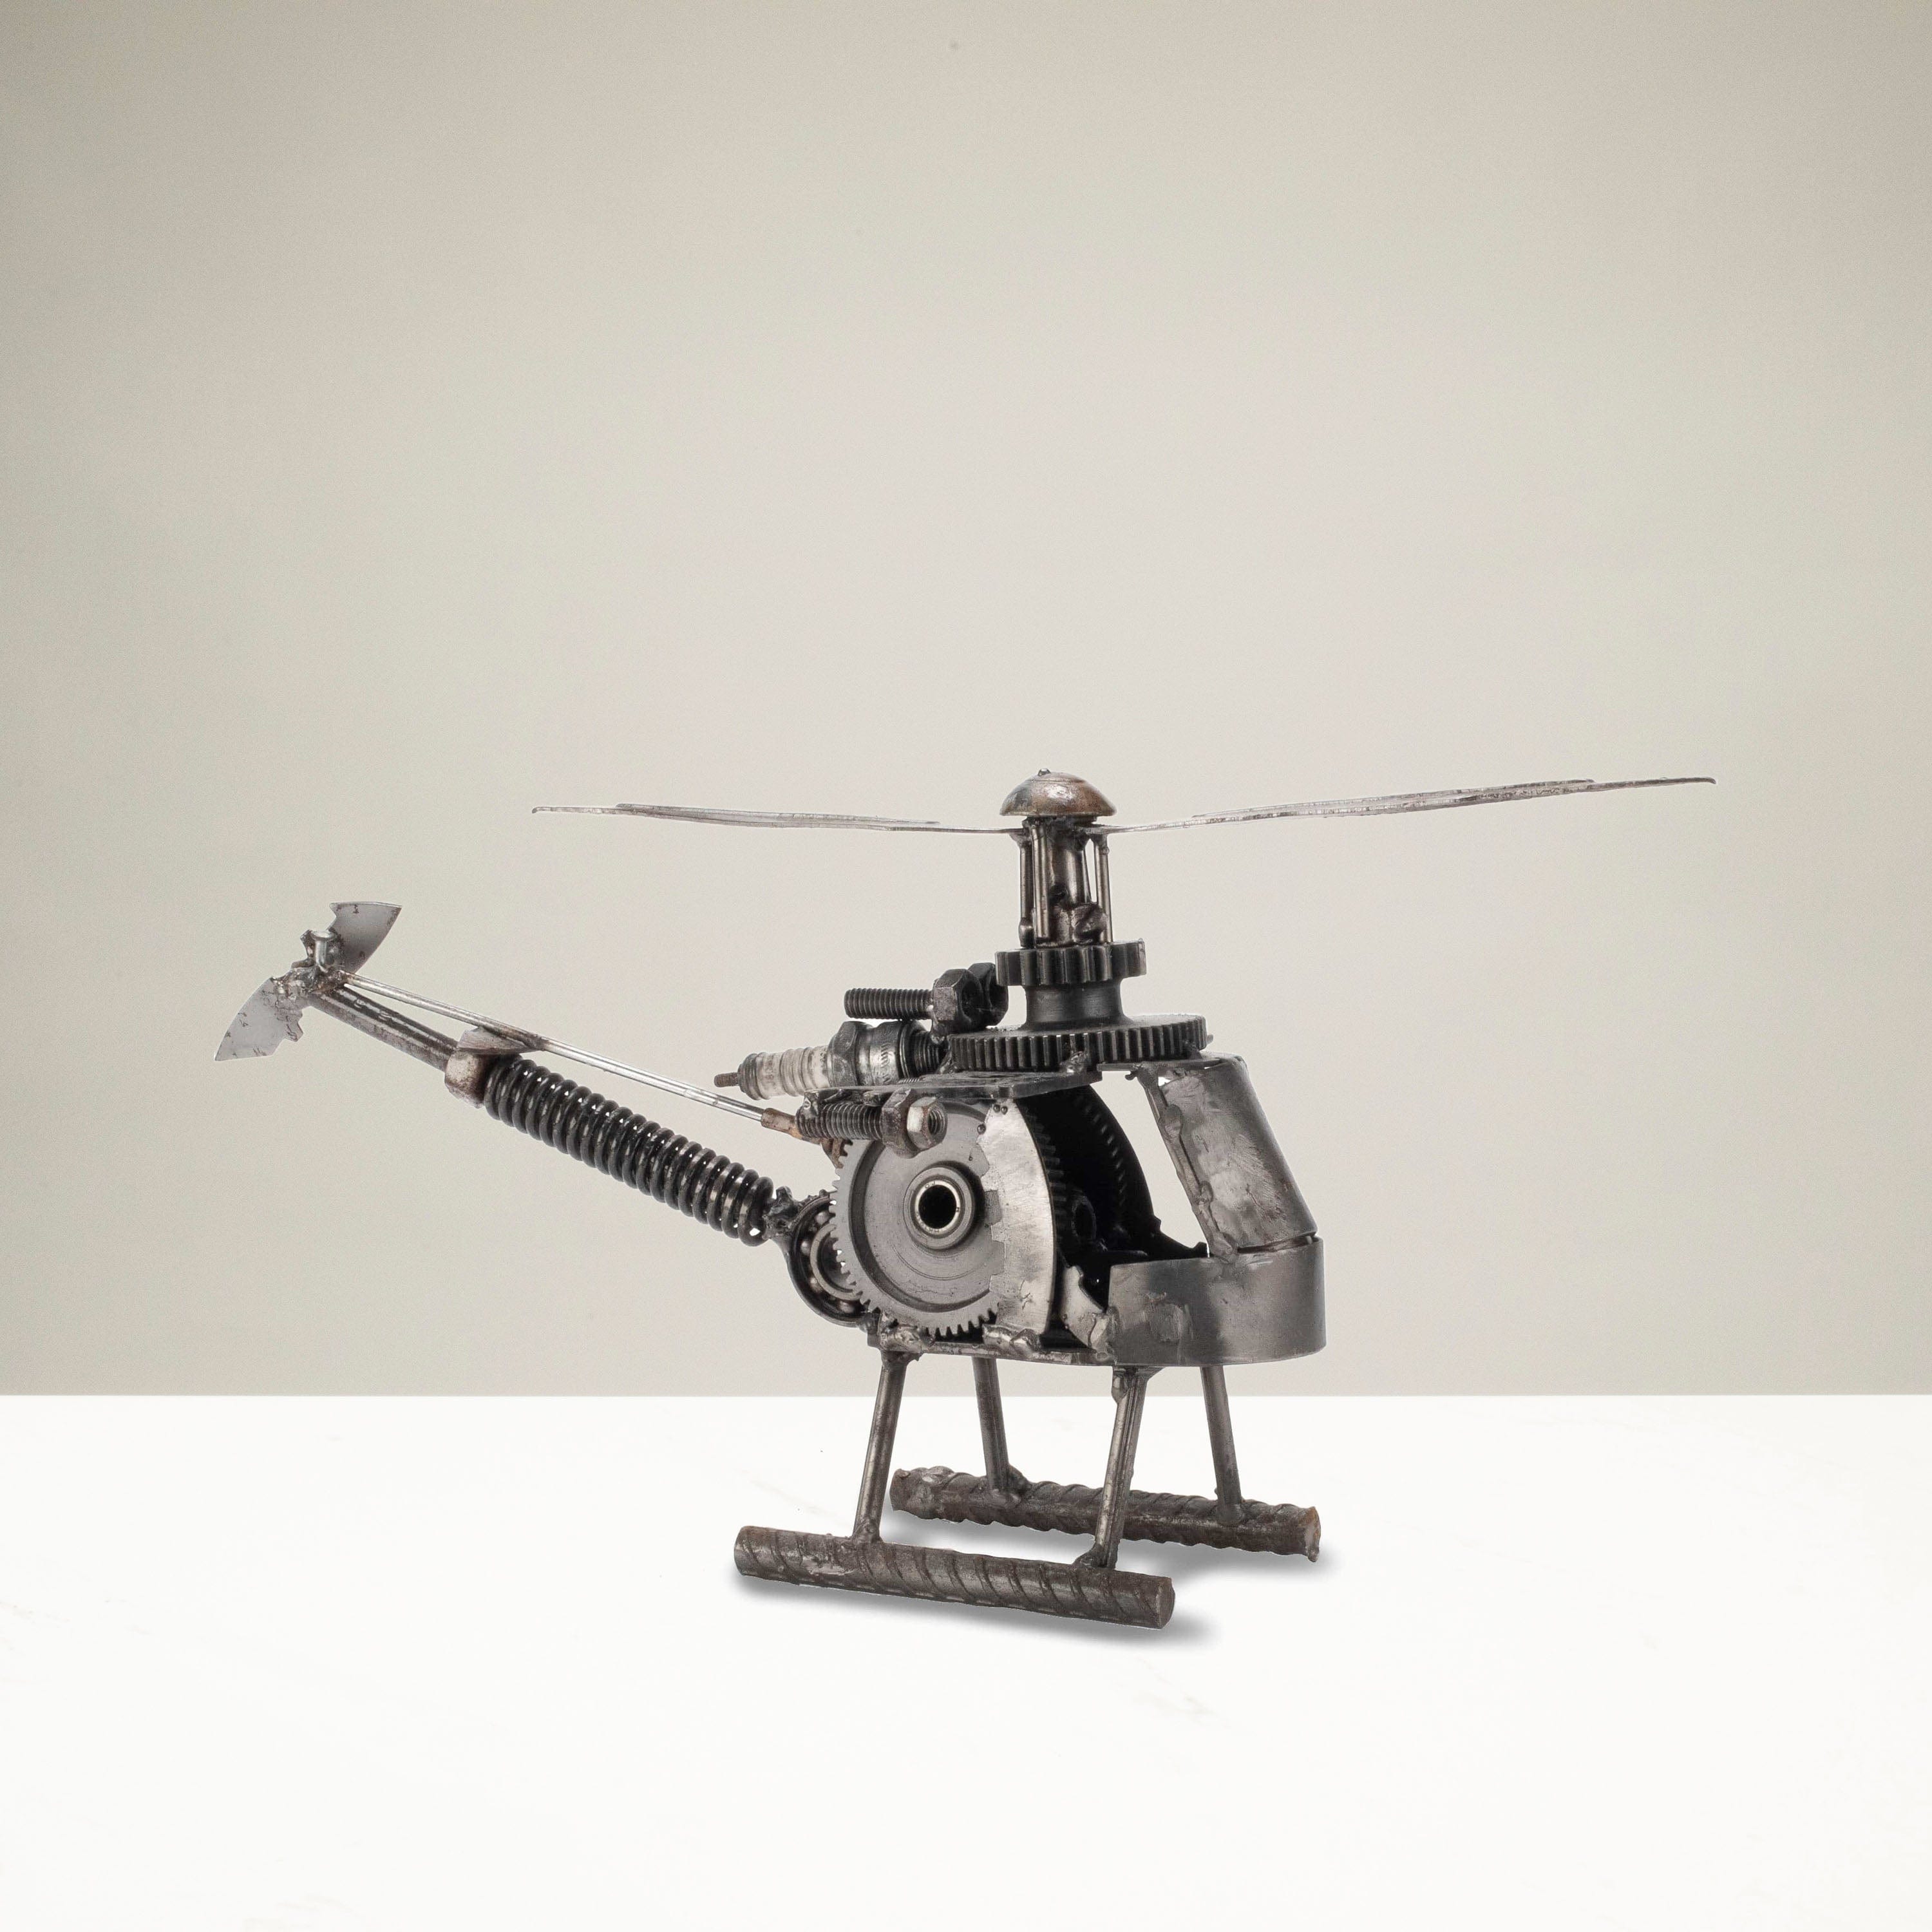 Kalifano Recycled Metal Art Helicopter Inspired Recycled Metal Art Sculpture -8" RMS-HC15-Y